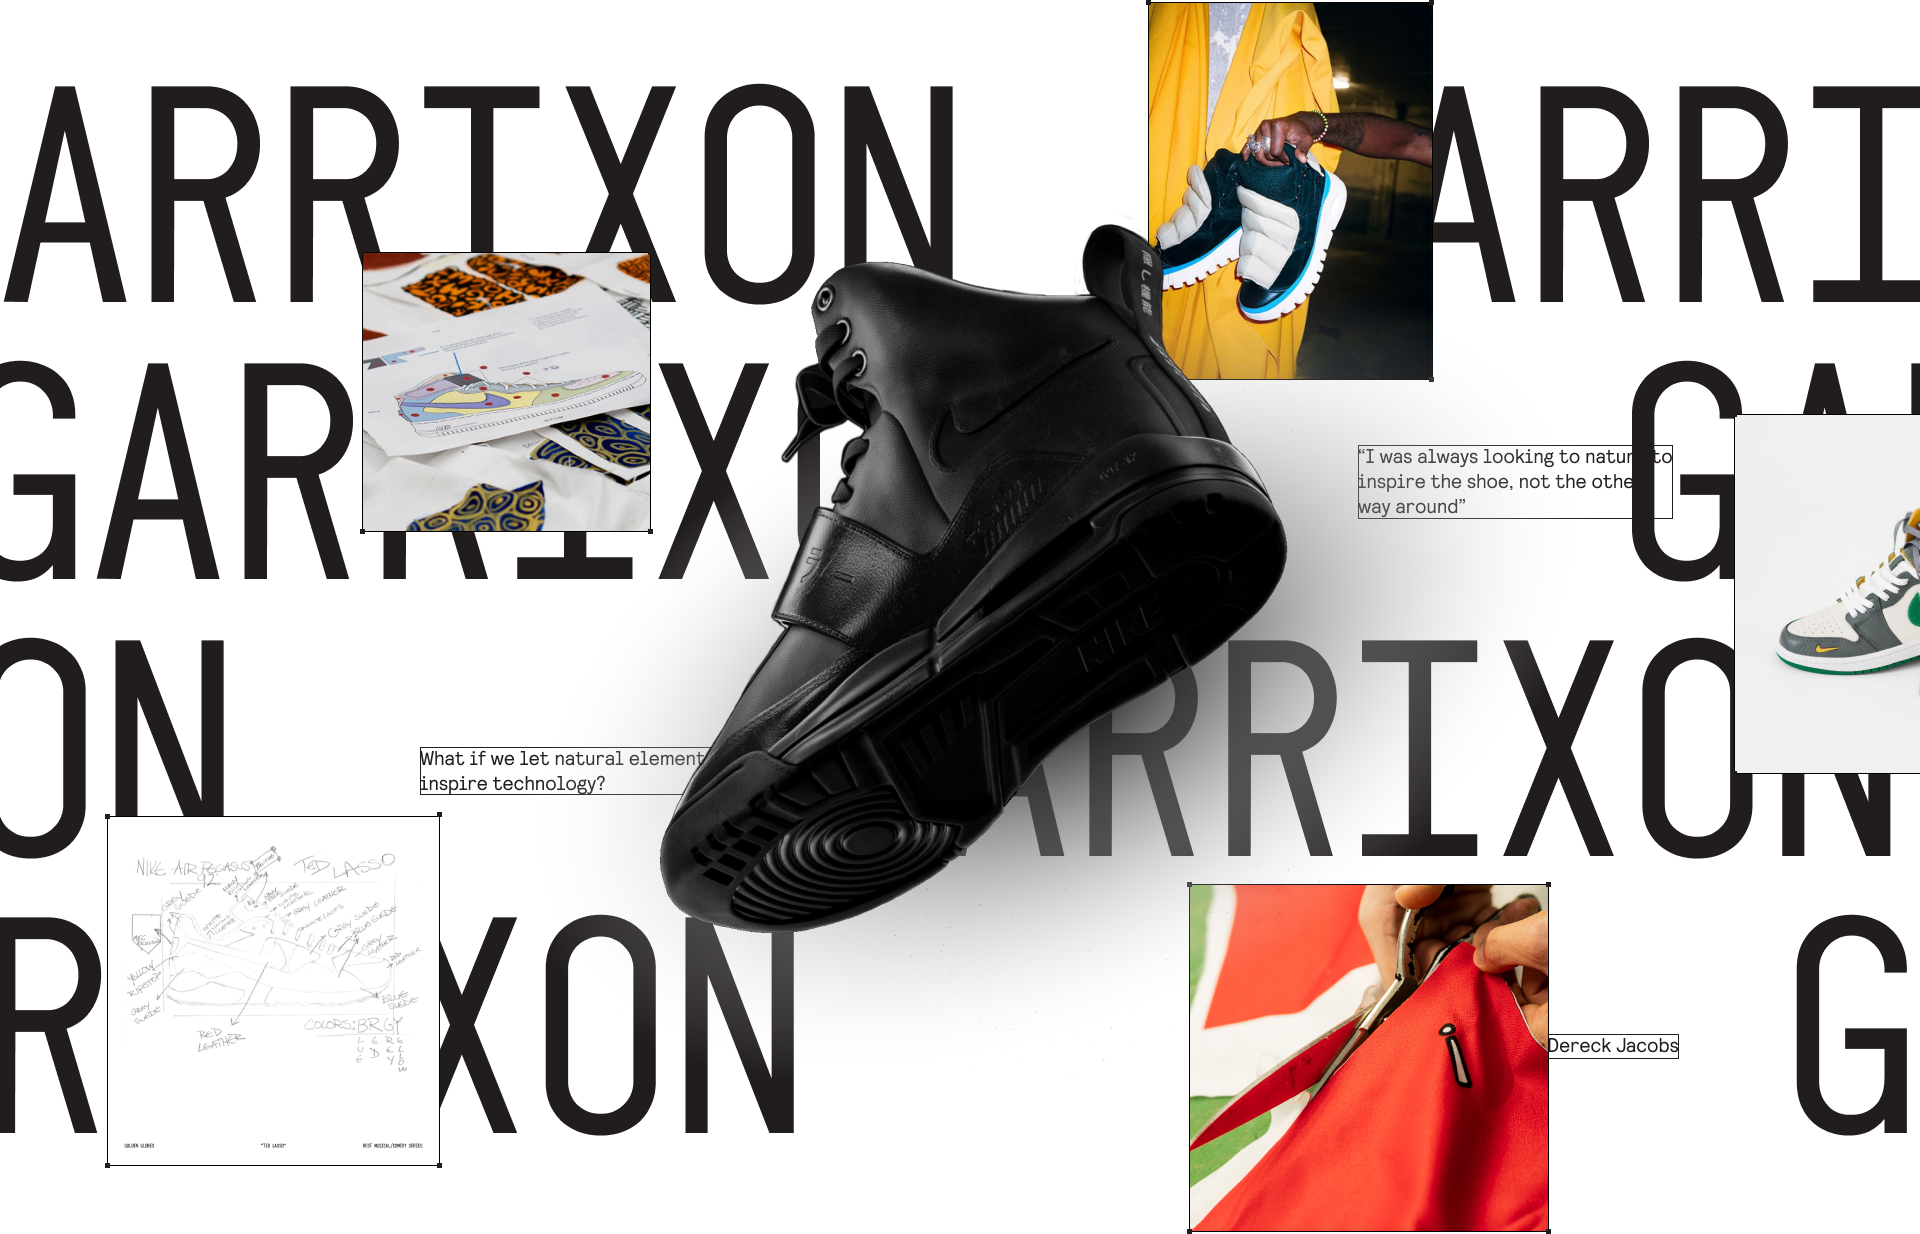 GARRIXON—Solving a sneaker brand’s “identity crisis” by focusing on its creators.